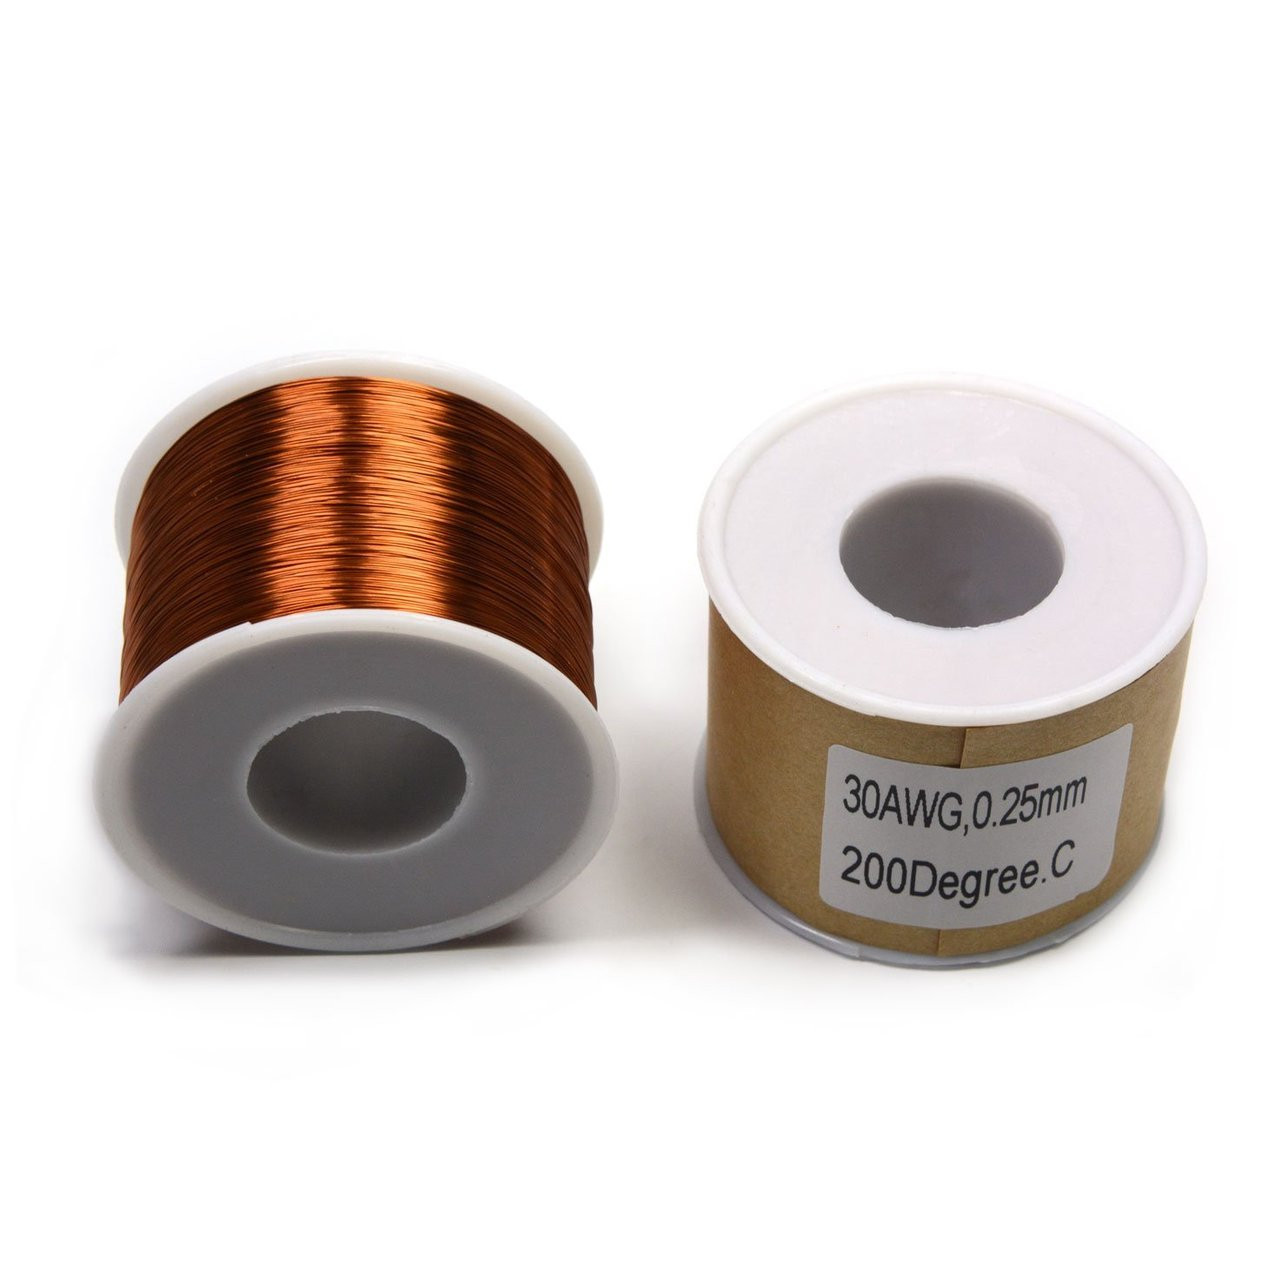 Magnet wire 1Lb Spool of 30 AWG Magnet Wire MW-30AWG-1